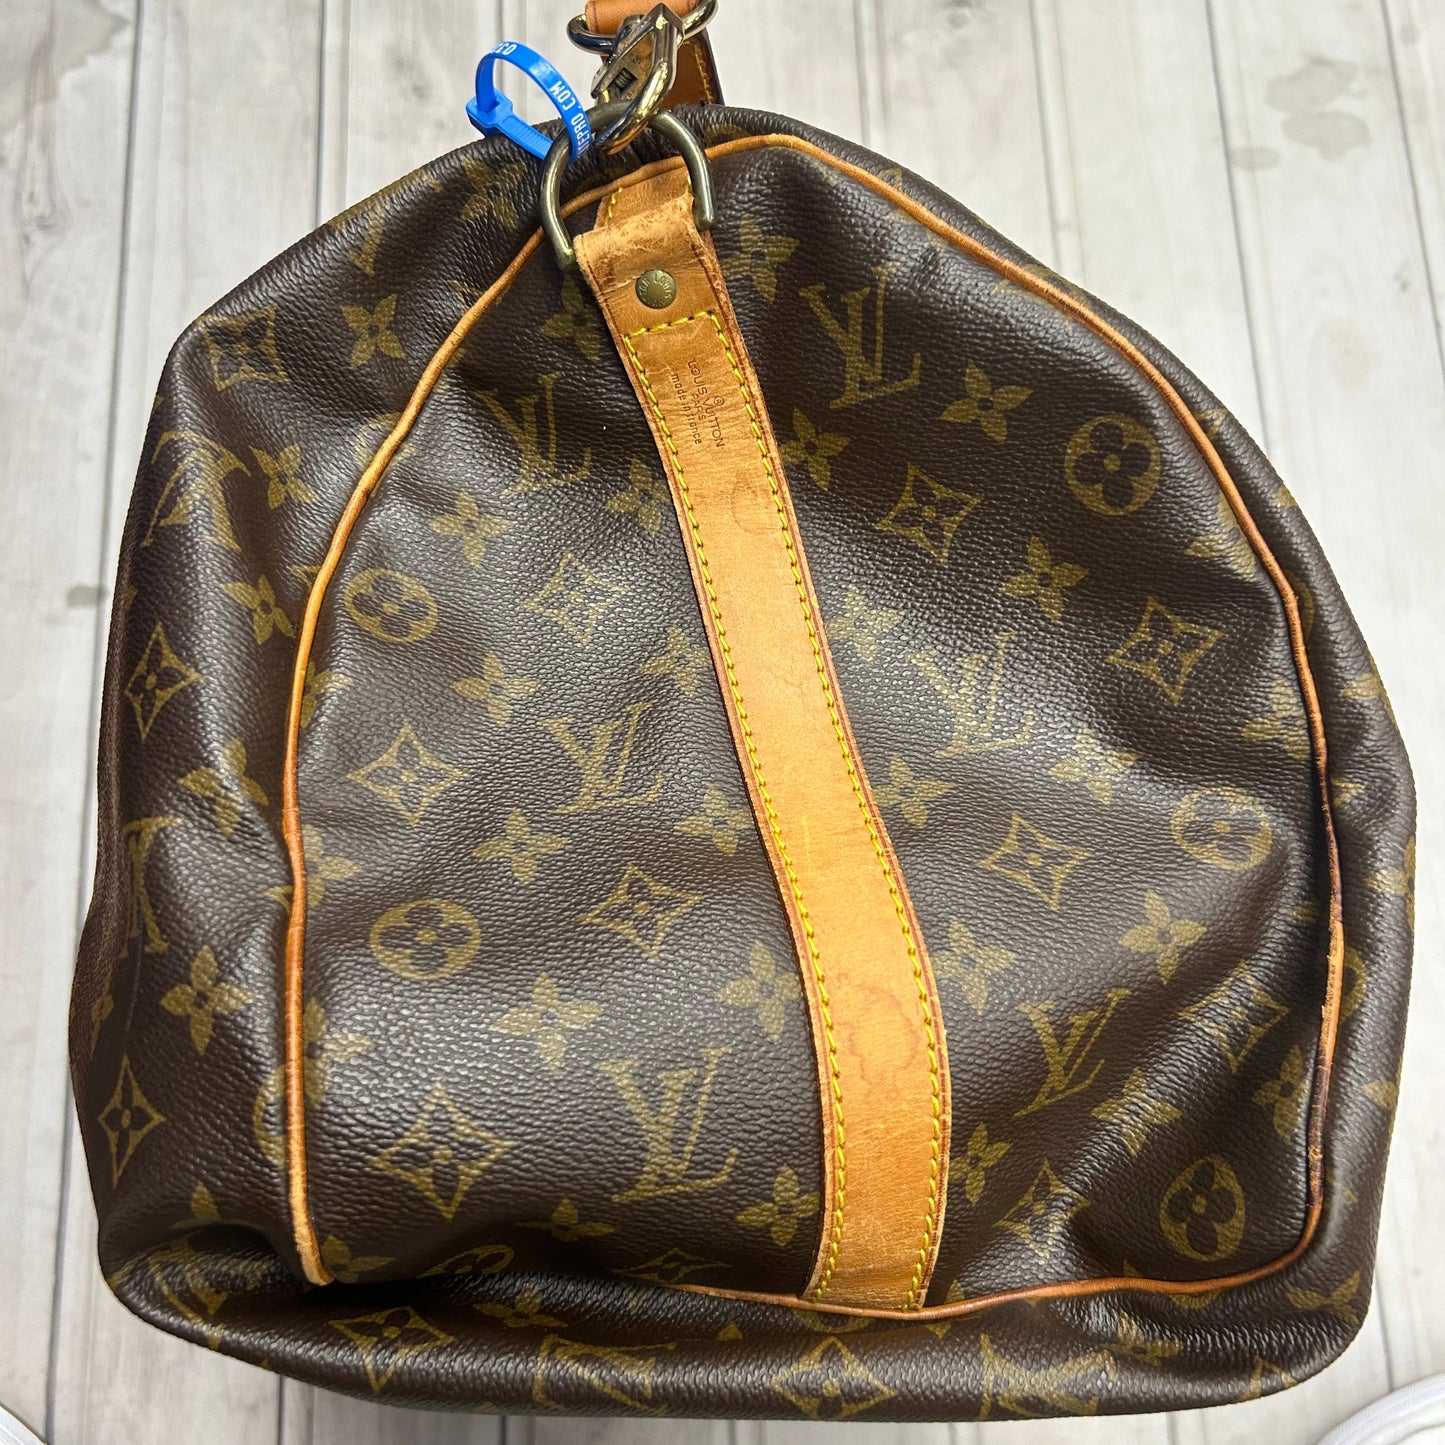 Duffle And Weekender Luxury Designer By Louis Vuitton, Size: Large